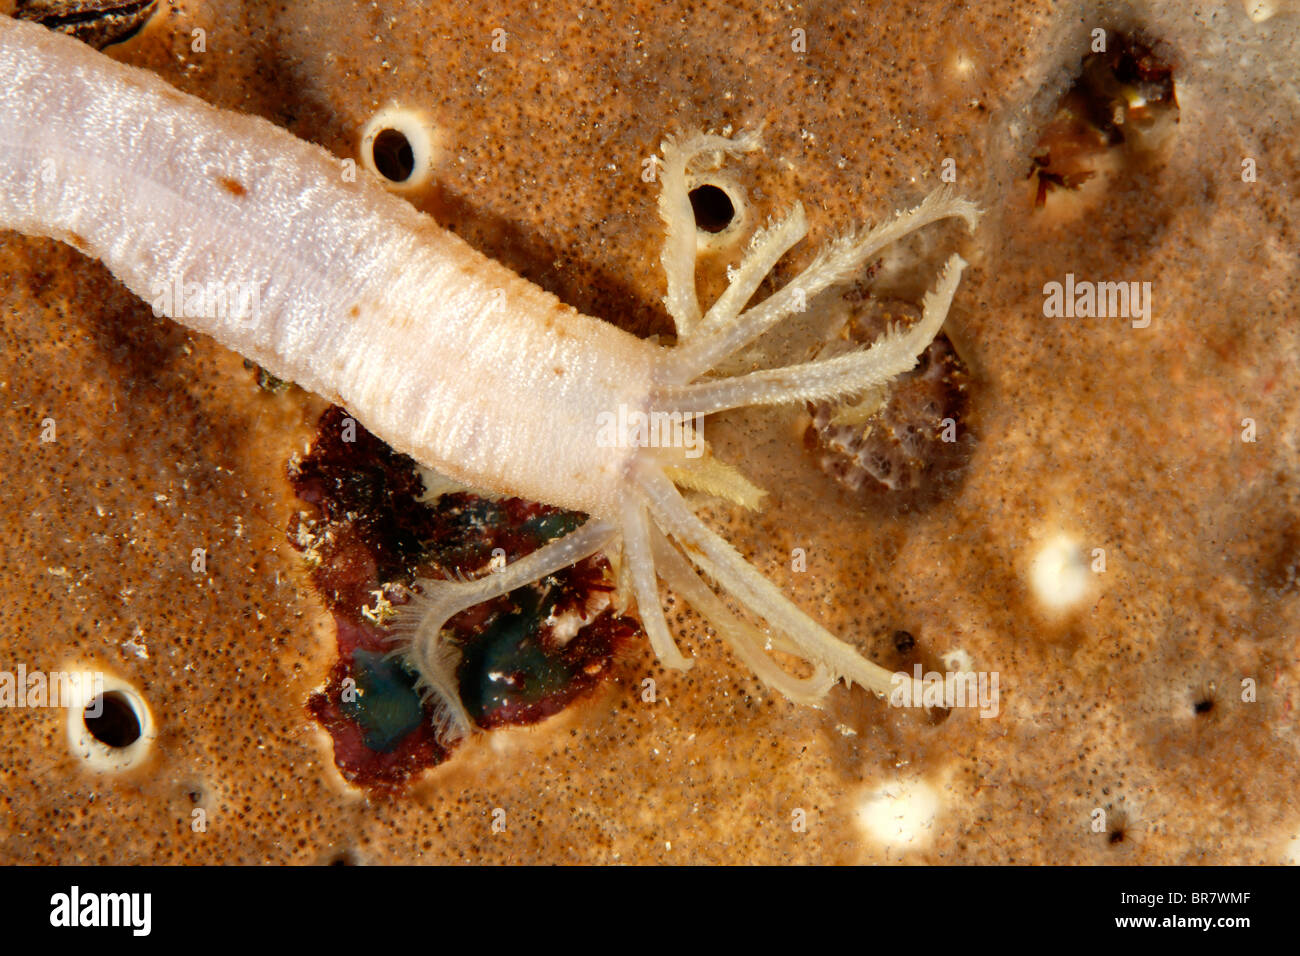 Sea cucumber, either Euapta sp, or Synapta sp.  Showing the feeding tentacles Stock Photo